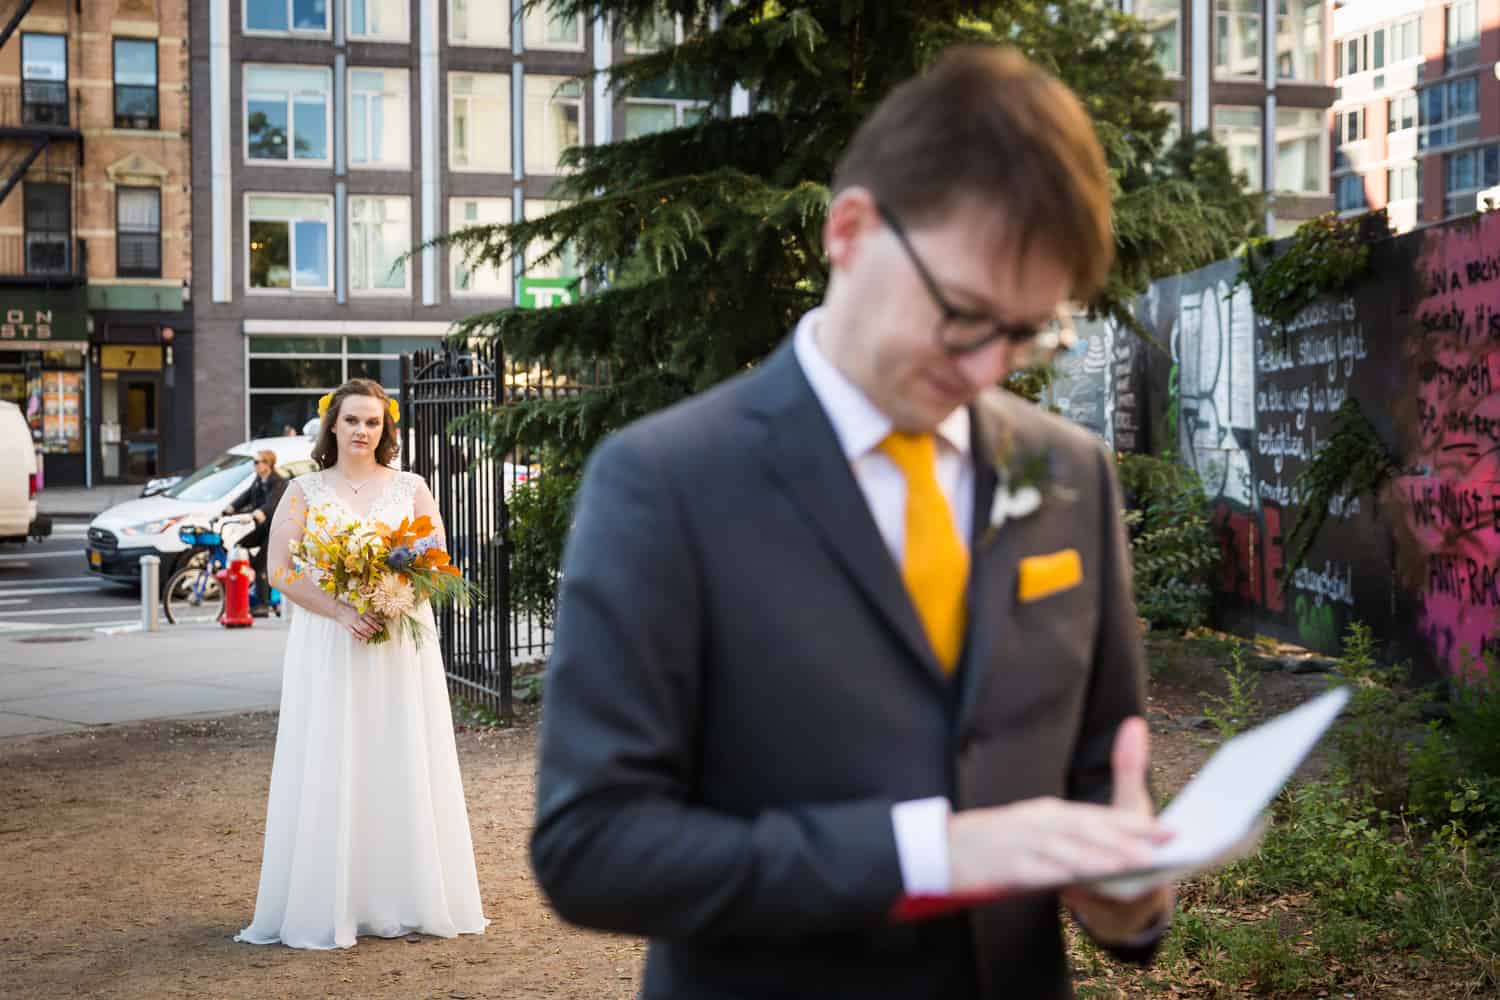 Groom reading letter with bride behind him